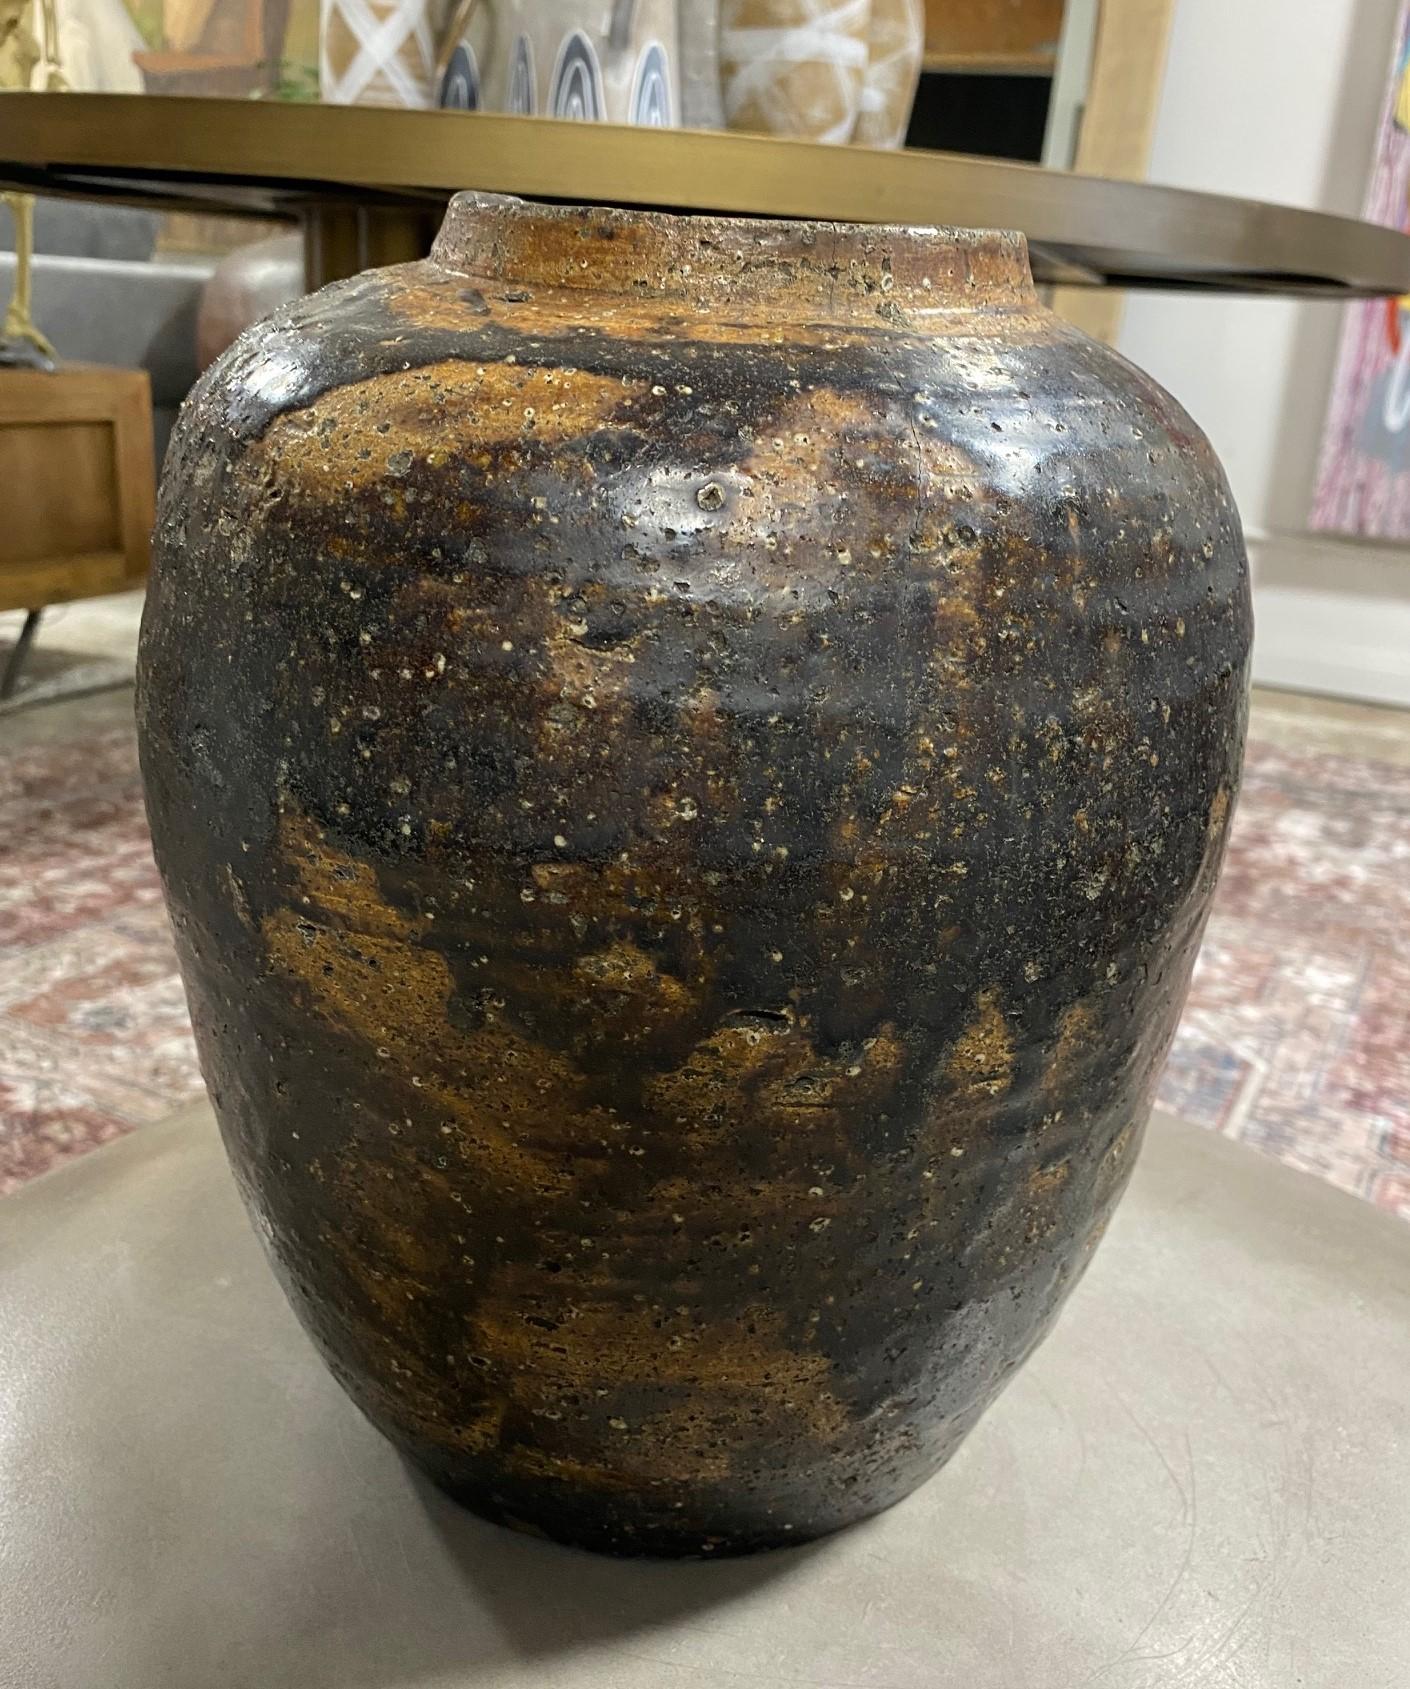 A wonderfully shaped gorgeously iron glazed stoneware Shigaraki tsubo jar vase - truly a stunning and unique work. The natural, organic glaze and tactile textures radiate in the light. We have not seen another with this glaze and pattern. This is a